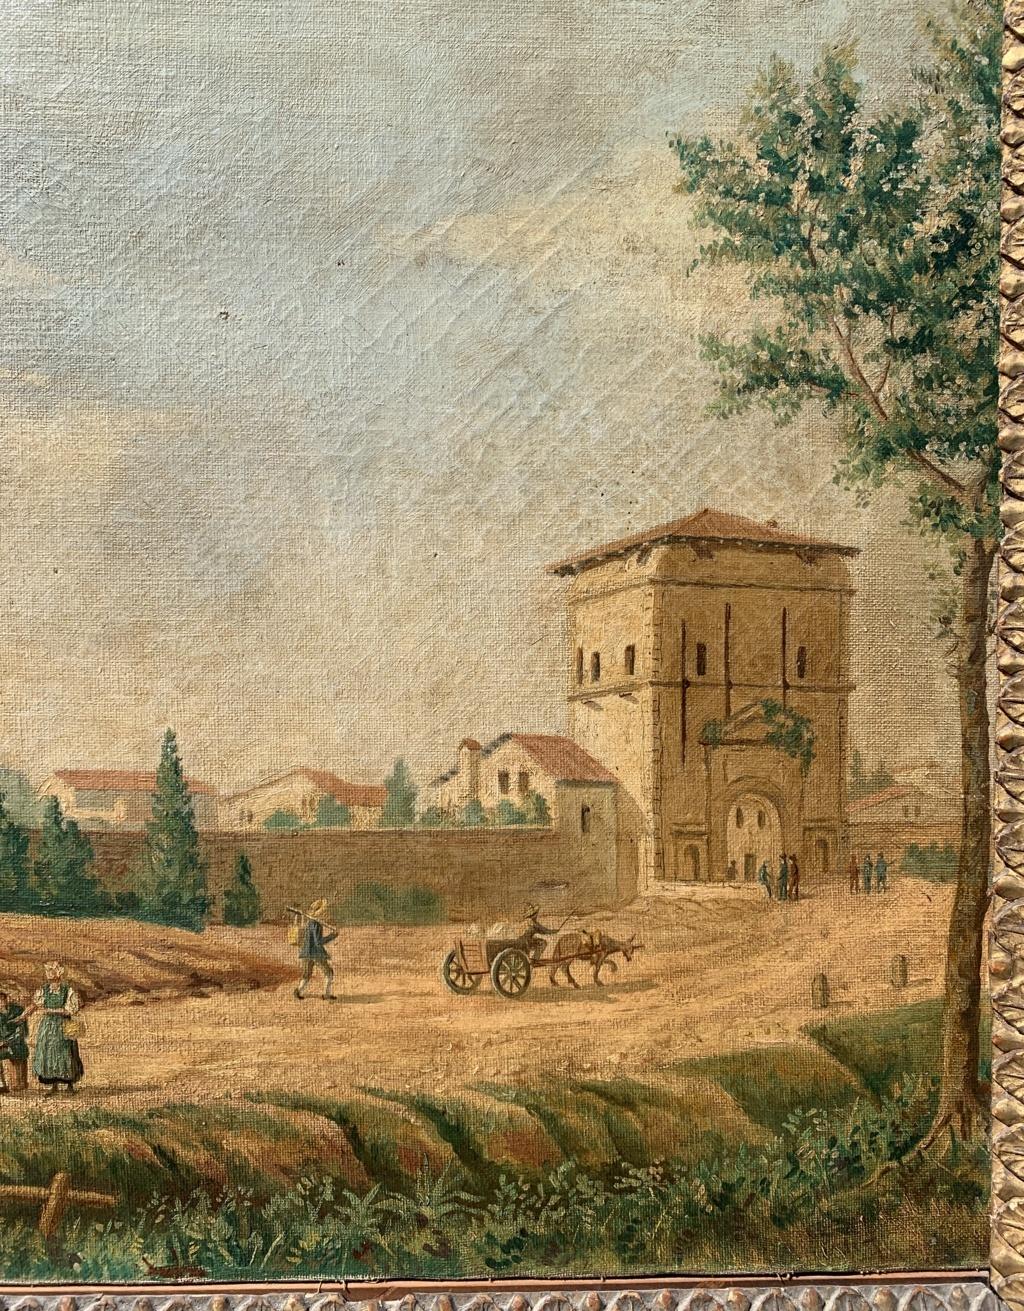 Venetian painter (19th century) - Padua, Porta Liviana.

37.5 x 48.5 cm without frame, 50.5 x 60 cm with frame.

Oil on canvas, in a carved wooden frame.

Condition report: Good state of conservation of the pictorial surface, there are signs of